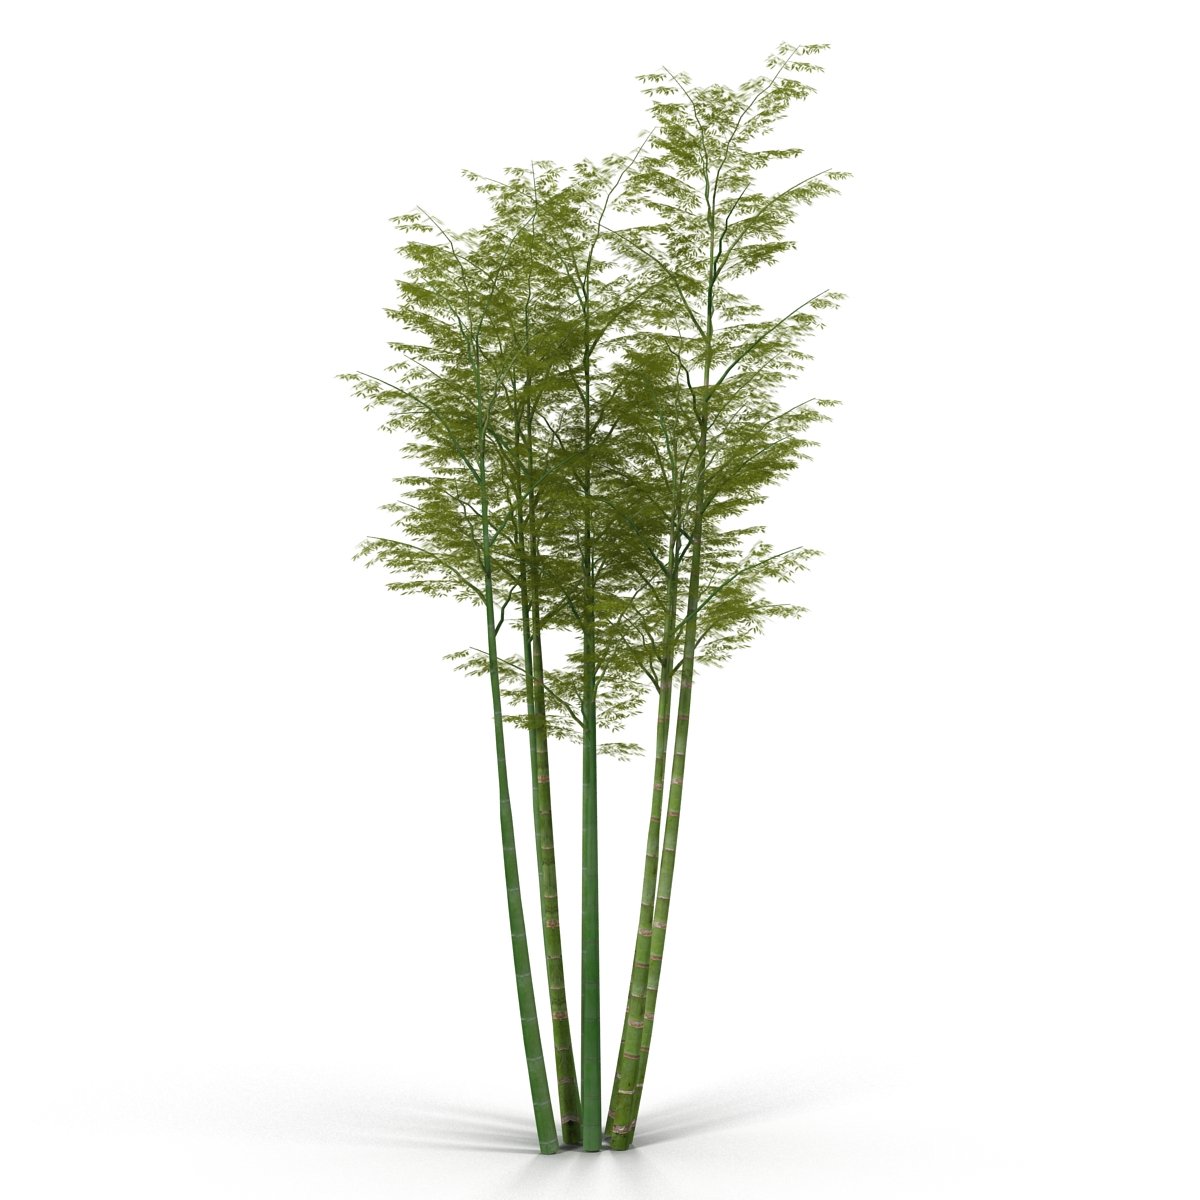 Tall bamboo tree is shown on a white background.